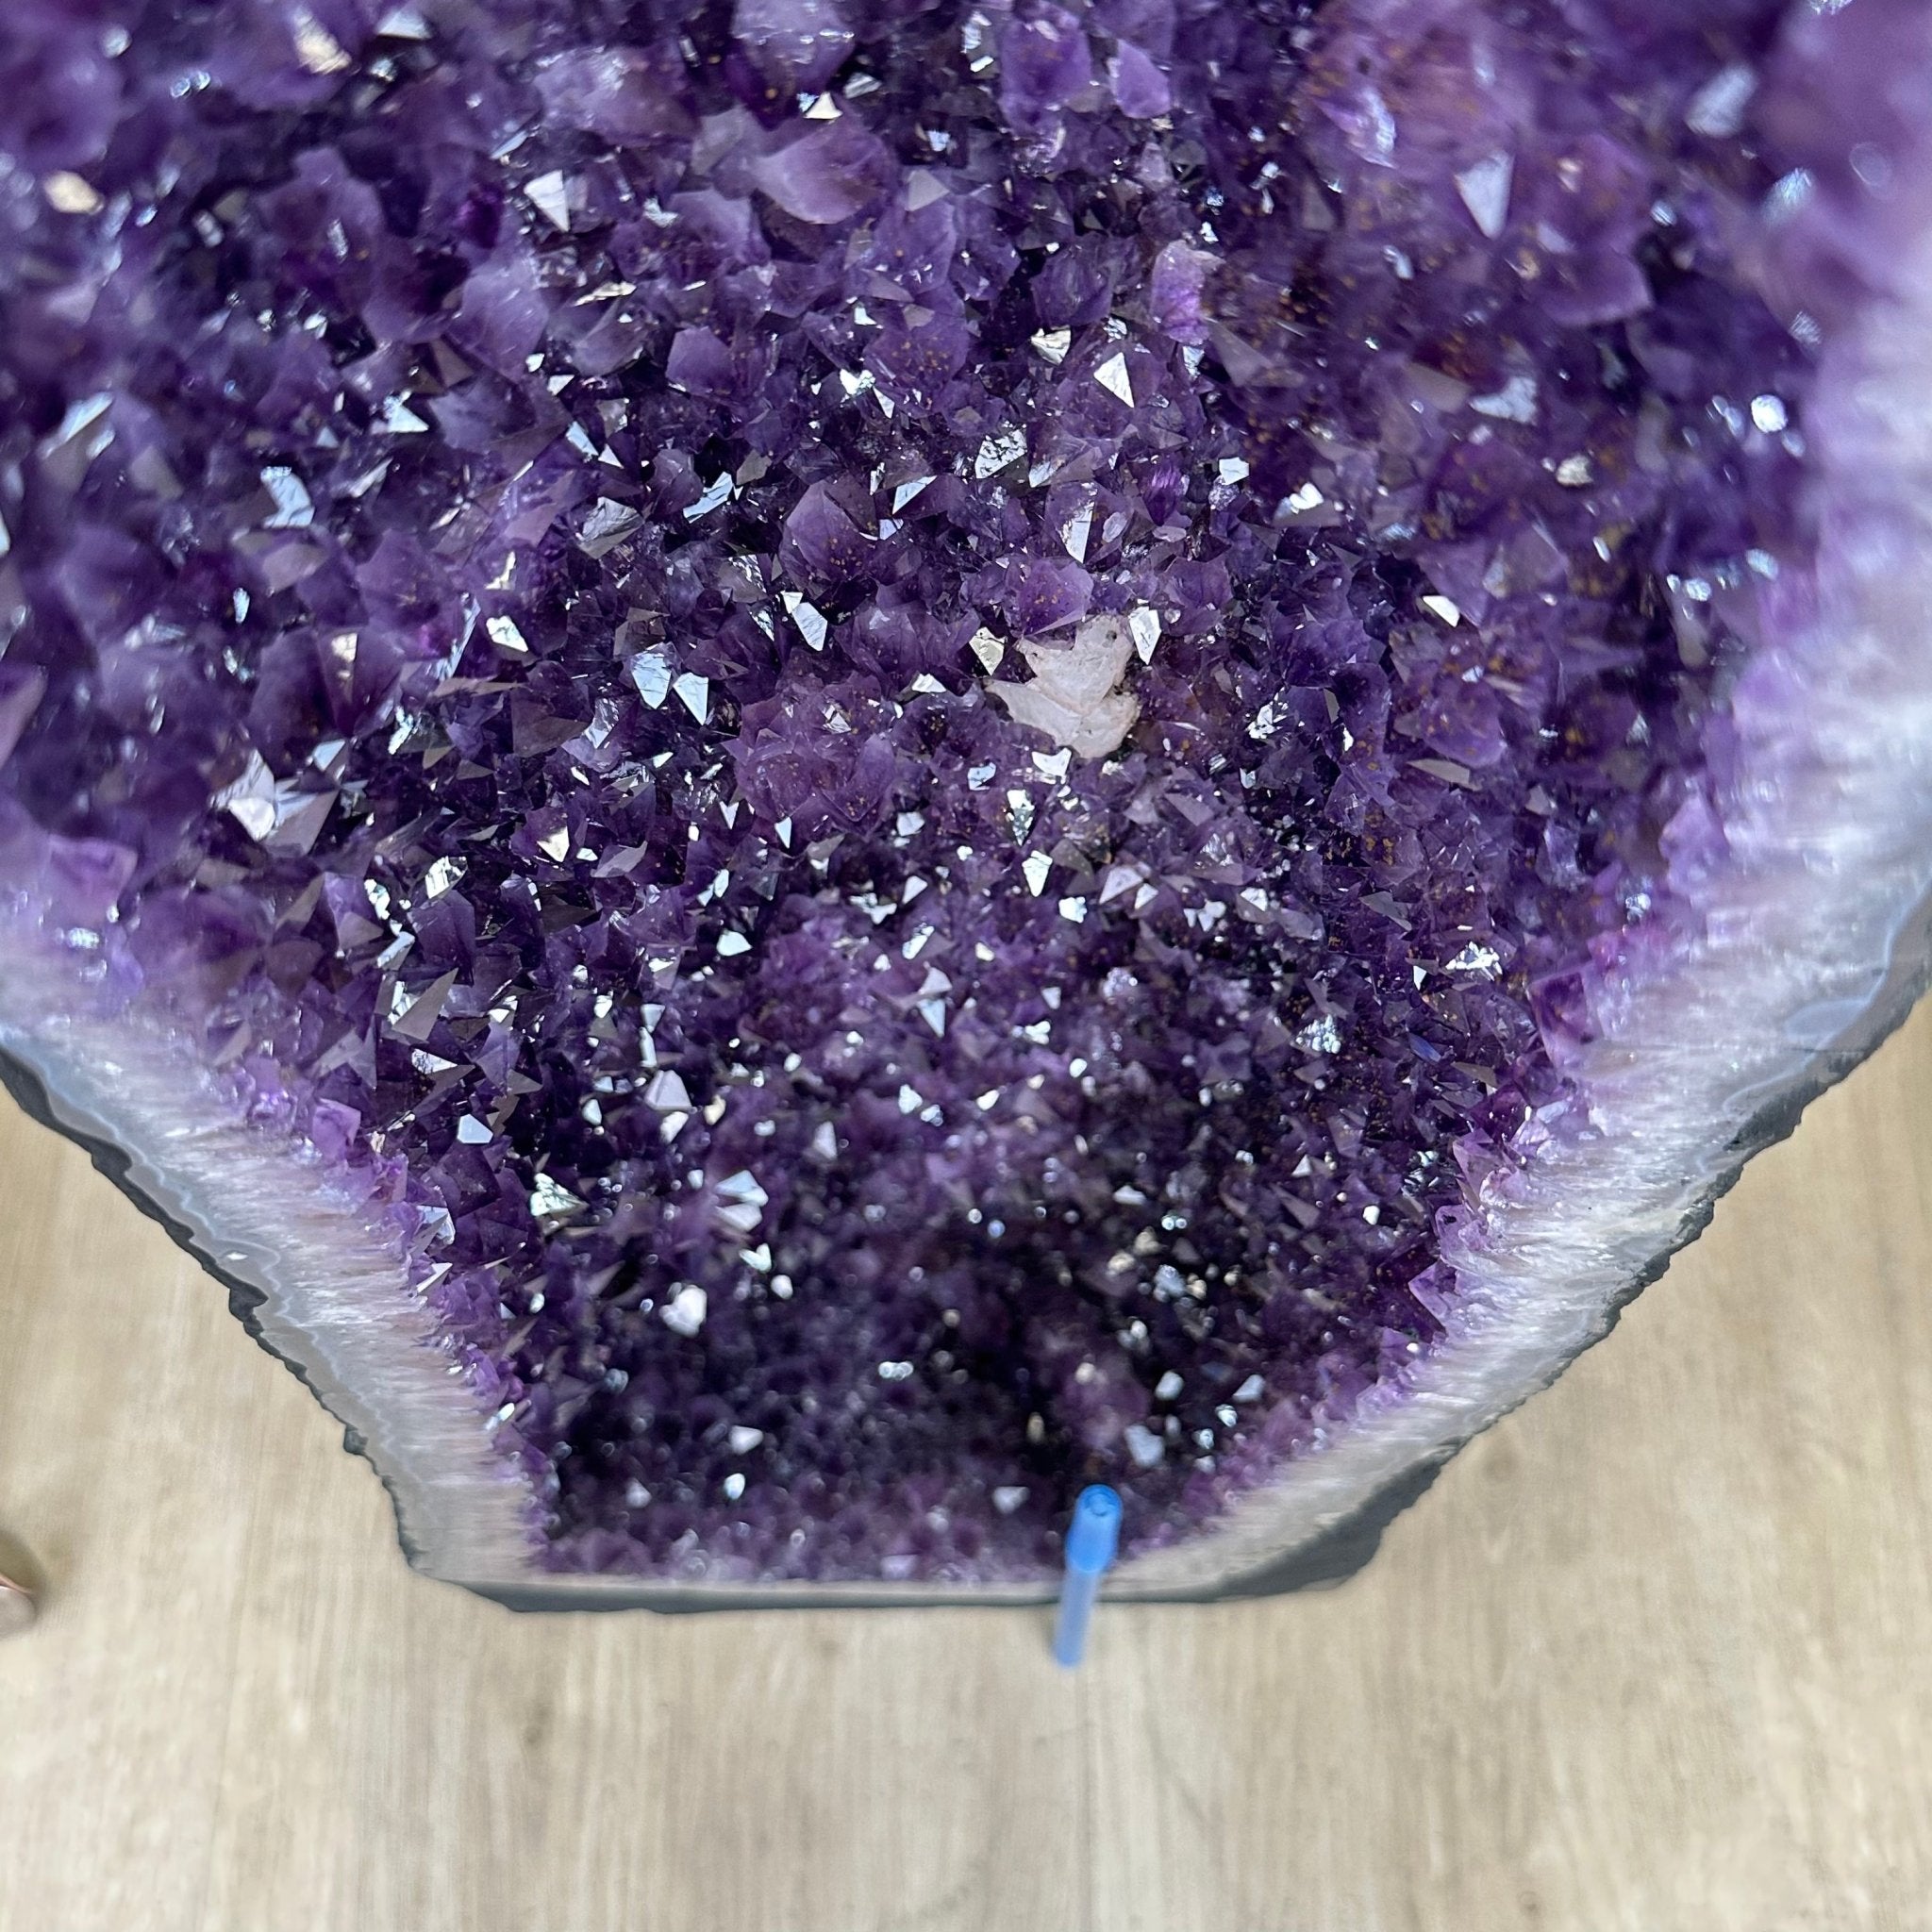 Extra Plus Quality Brazilian Amethyst Cathedral, 76.4 lbs & 38.5" Tall, Model #5601-1230 by Brazil Gems - Brazil GemsBrazil GemsExtra Plus Quality Brazilian Amethyst Cathedral, 76.4 lbs & 38.5" Tall, Model #5601-1230 by Brazil GemsCathedrals5601-1230